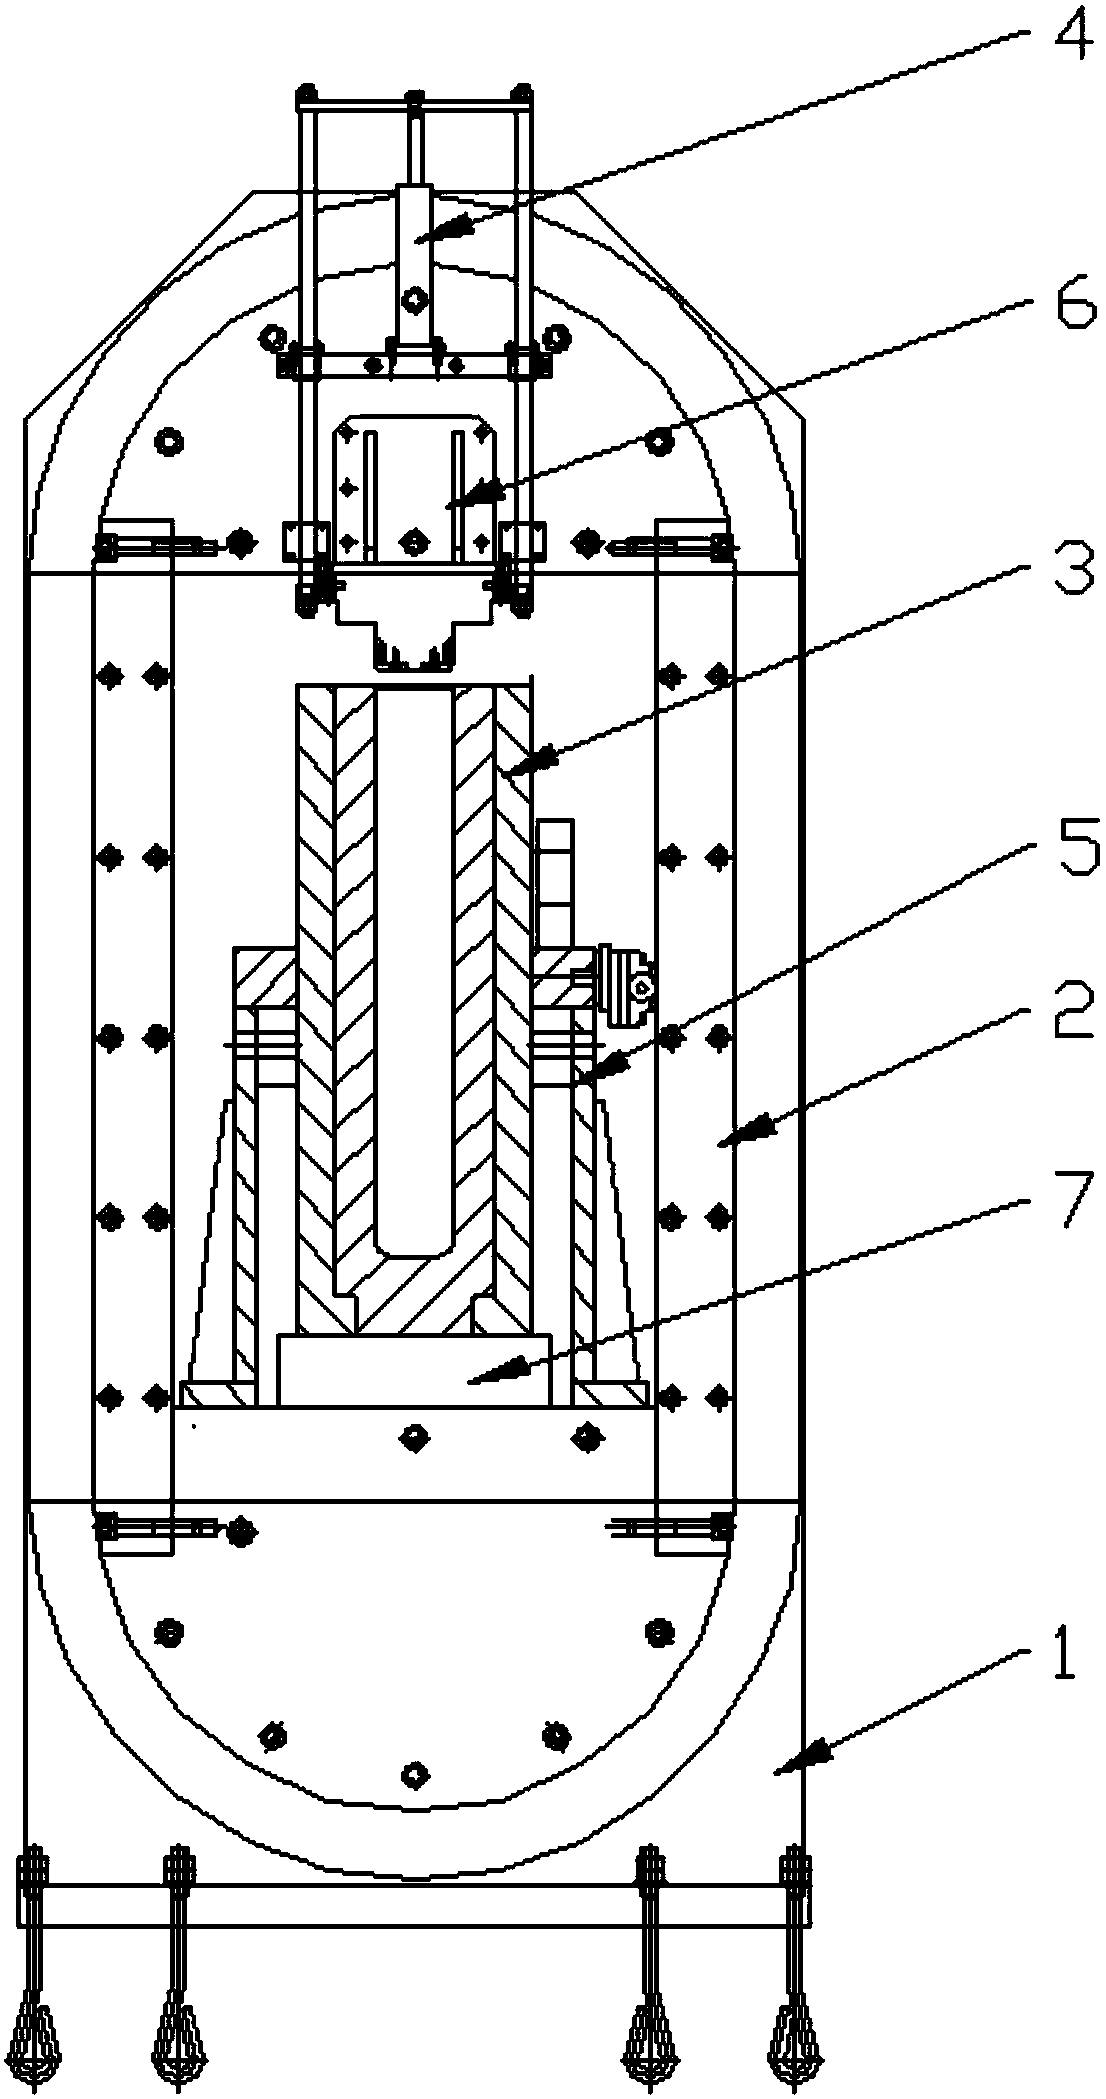 Tilting type ultra-high-pressure equipment with automatic starting function